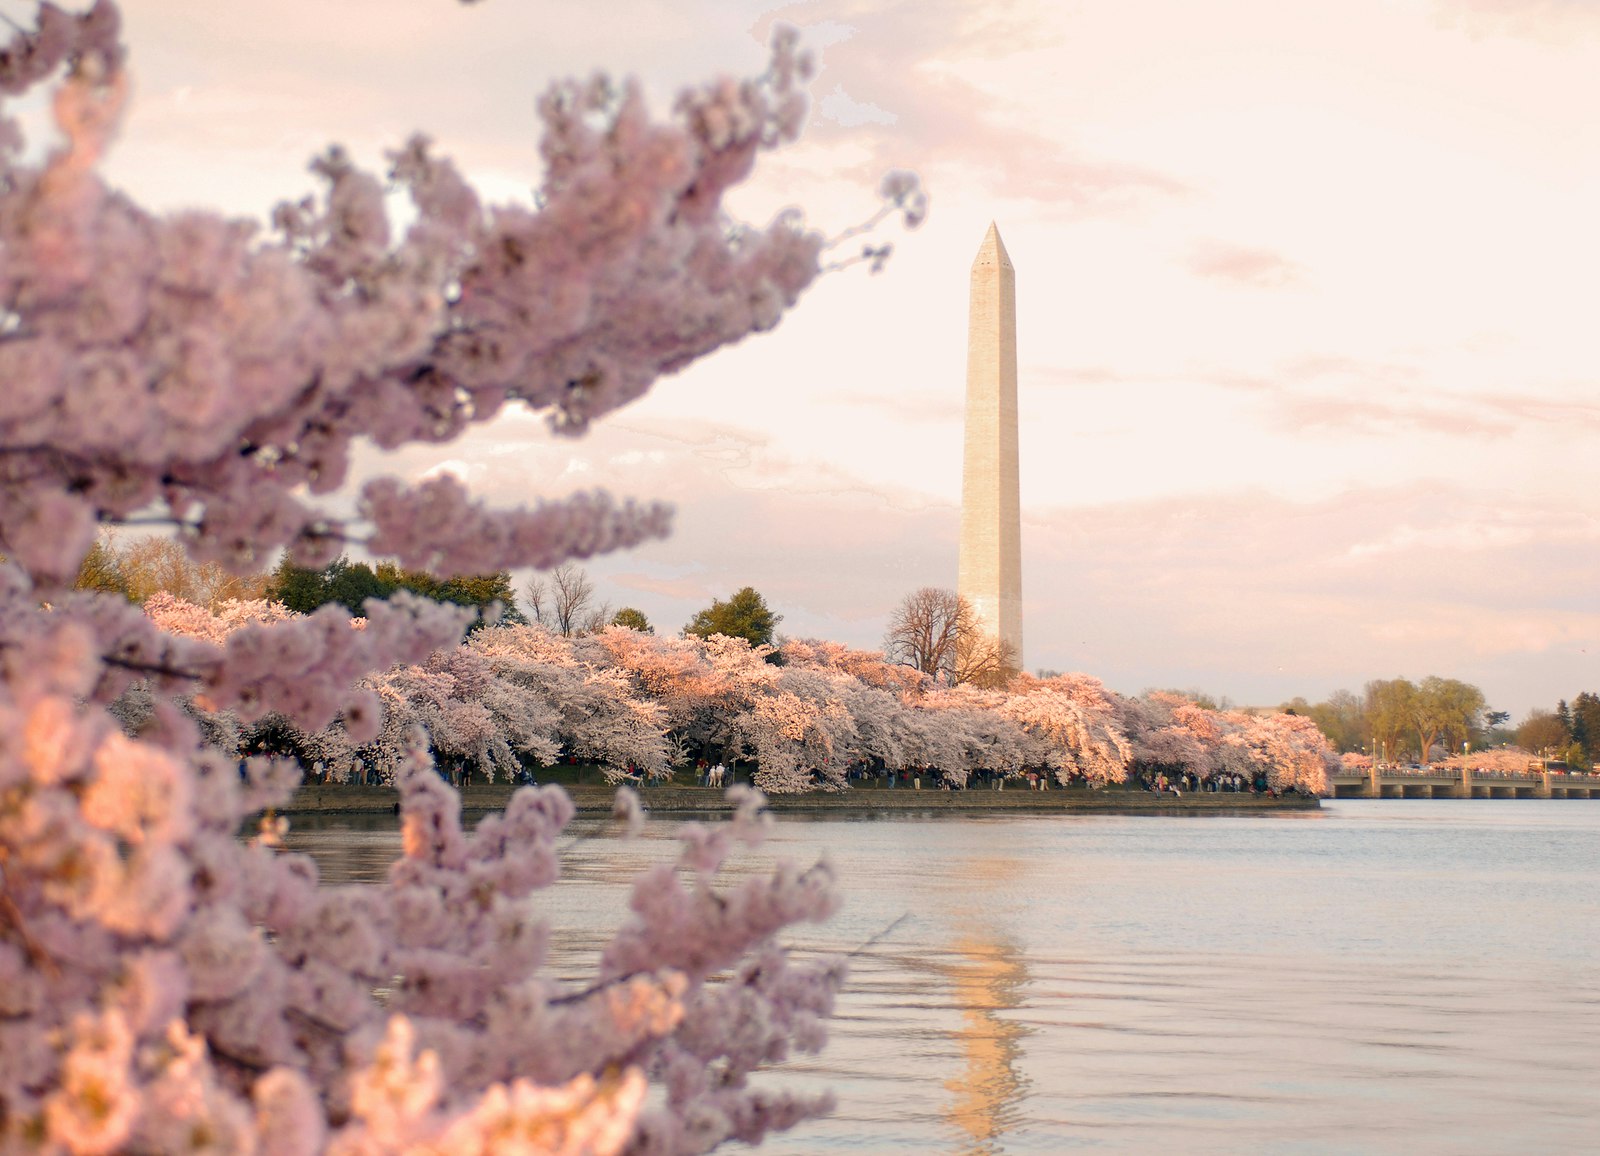 Cherry blossom branches extend over a still pool of water. In the distance, you can spot the Washington Monument